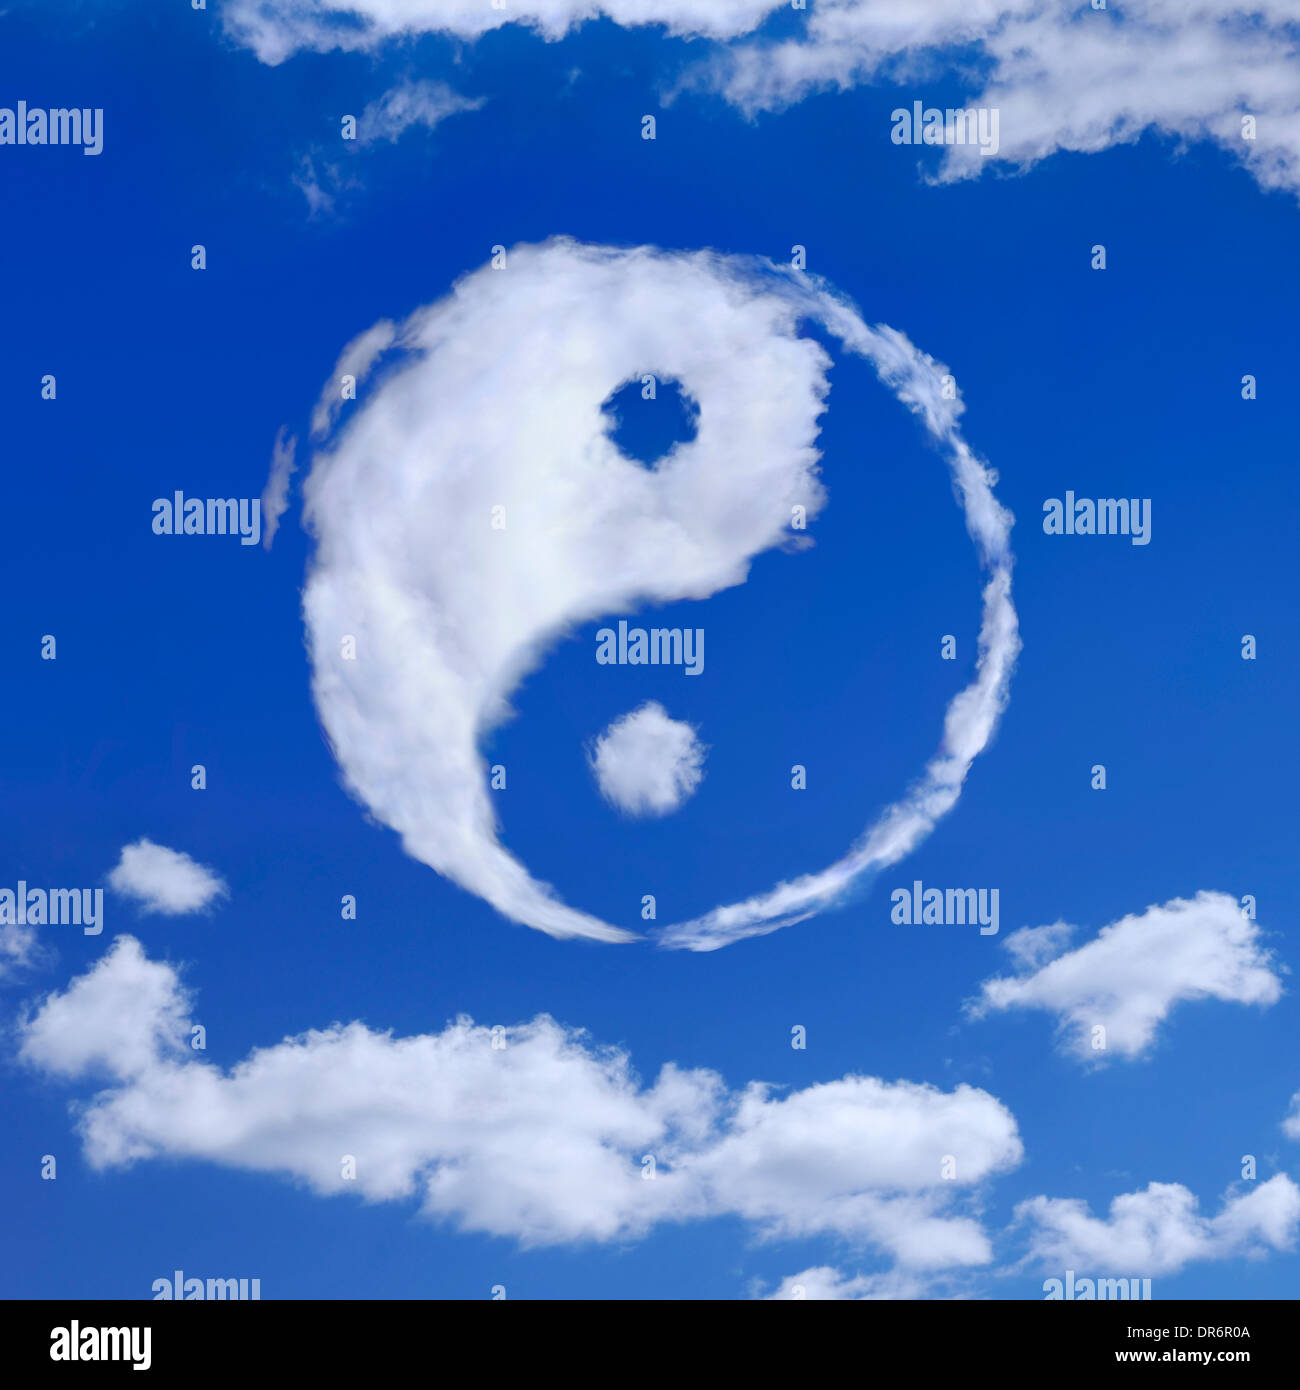 Yin-Yang spiritual symbol made from white clouds in blue sky. Meditation, spirituality concept. Stock Photo